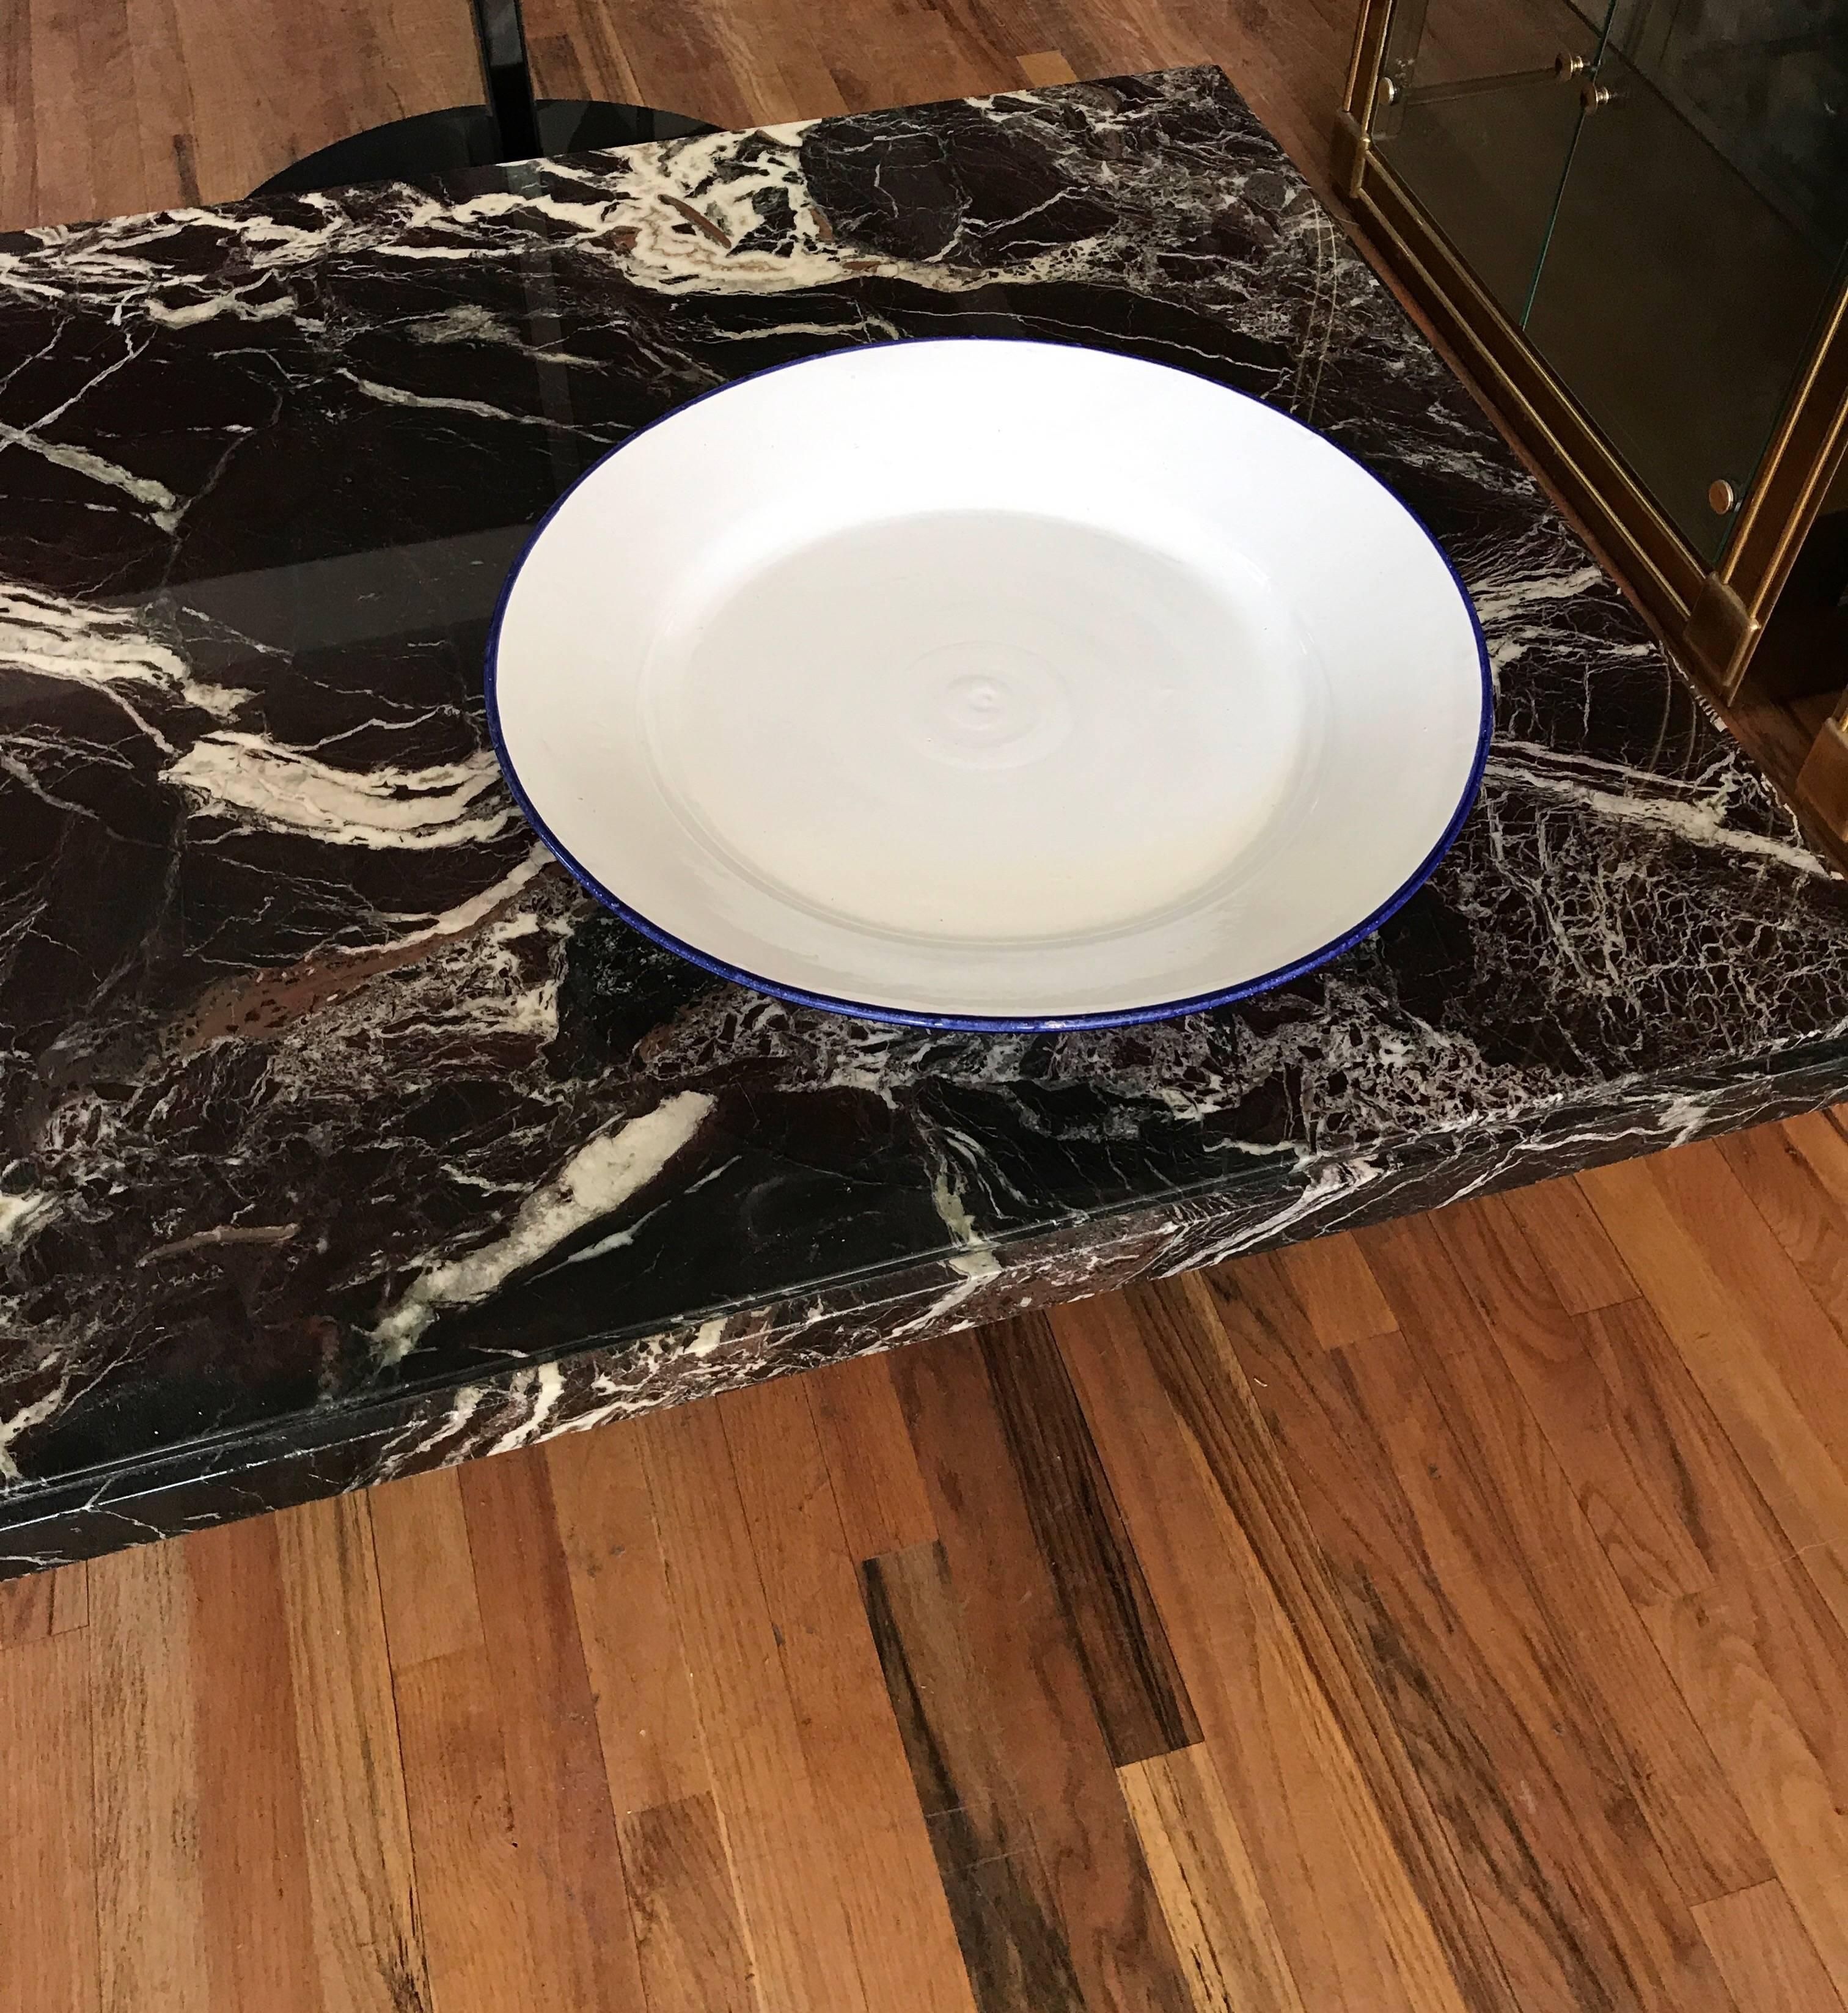 White ceramic large Italian faience charger. The handcrafted platter has a cobalt edge.
Fantastic decorative object with fantastic proportions. Wonderful as a centrepiece or as a large serveware.